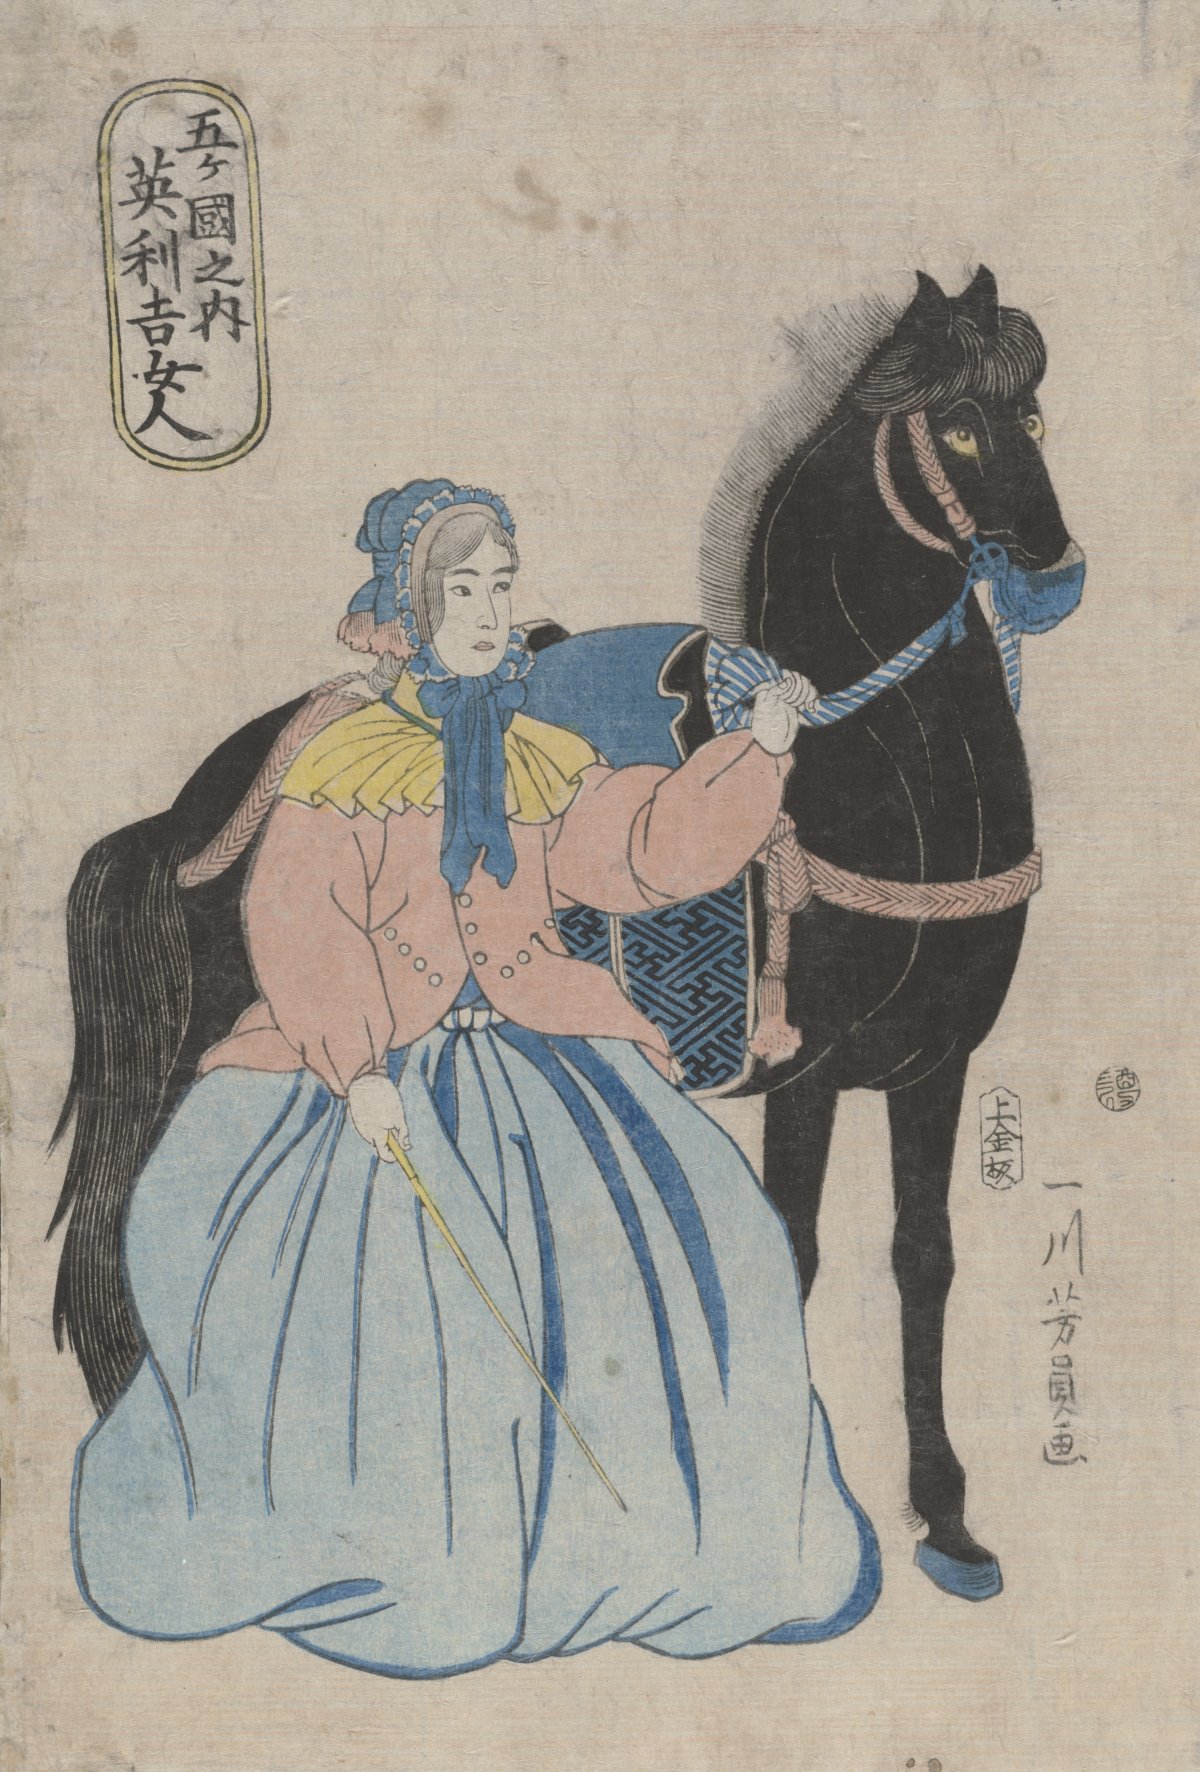 Japanese woodblock print shows a western woman holding the reins of a horse.